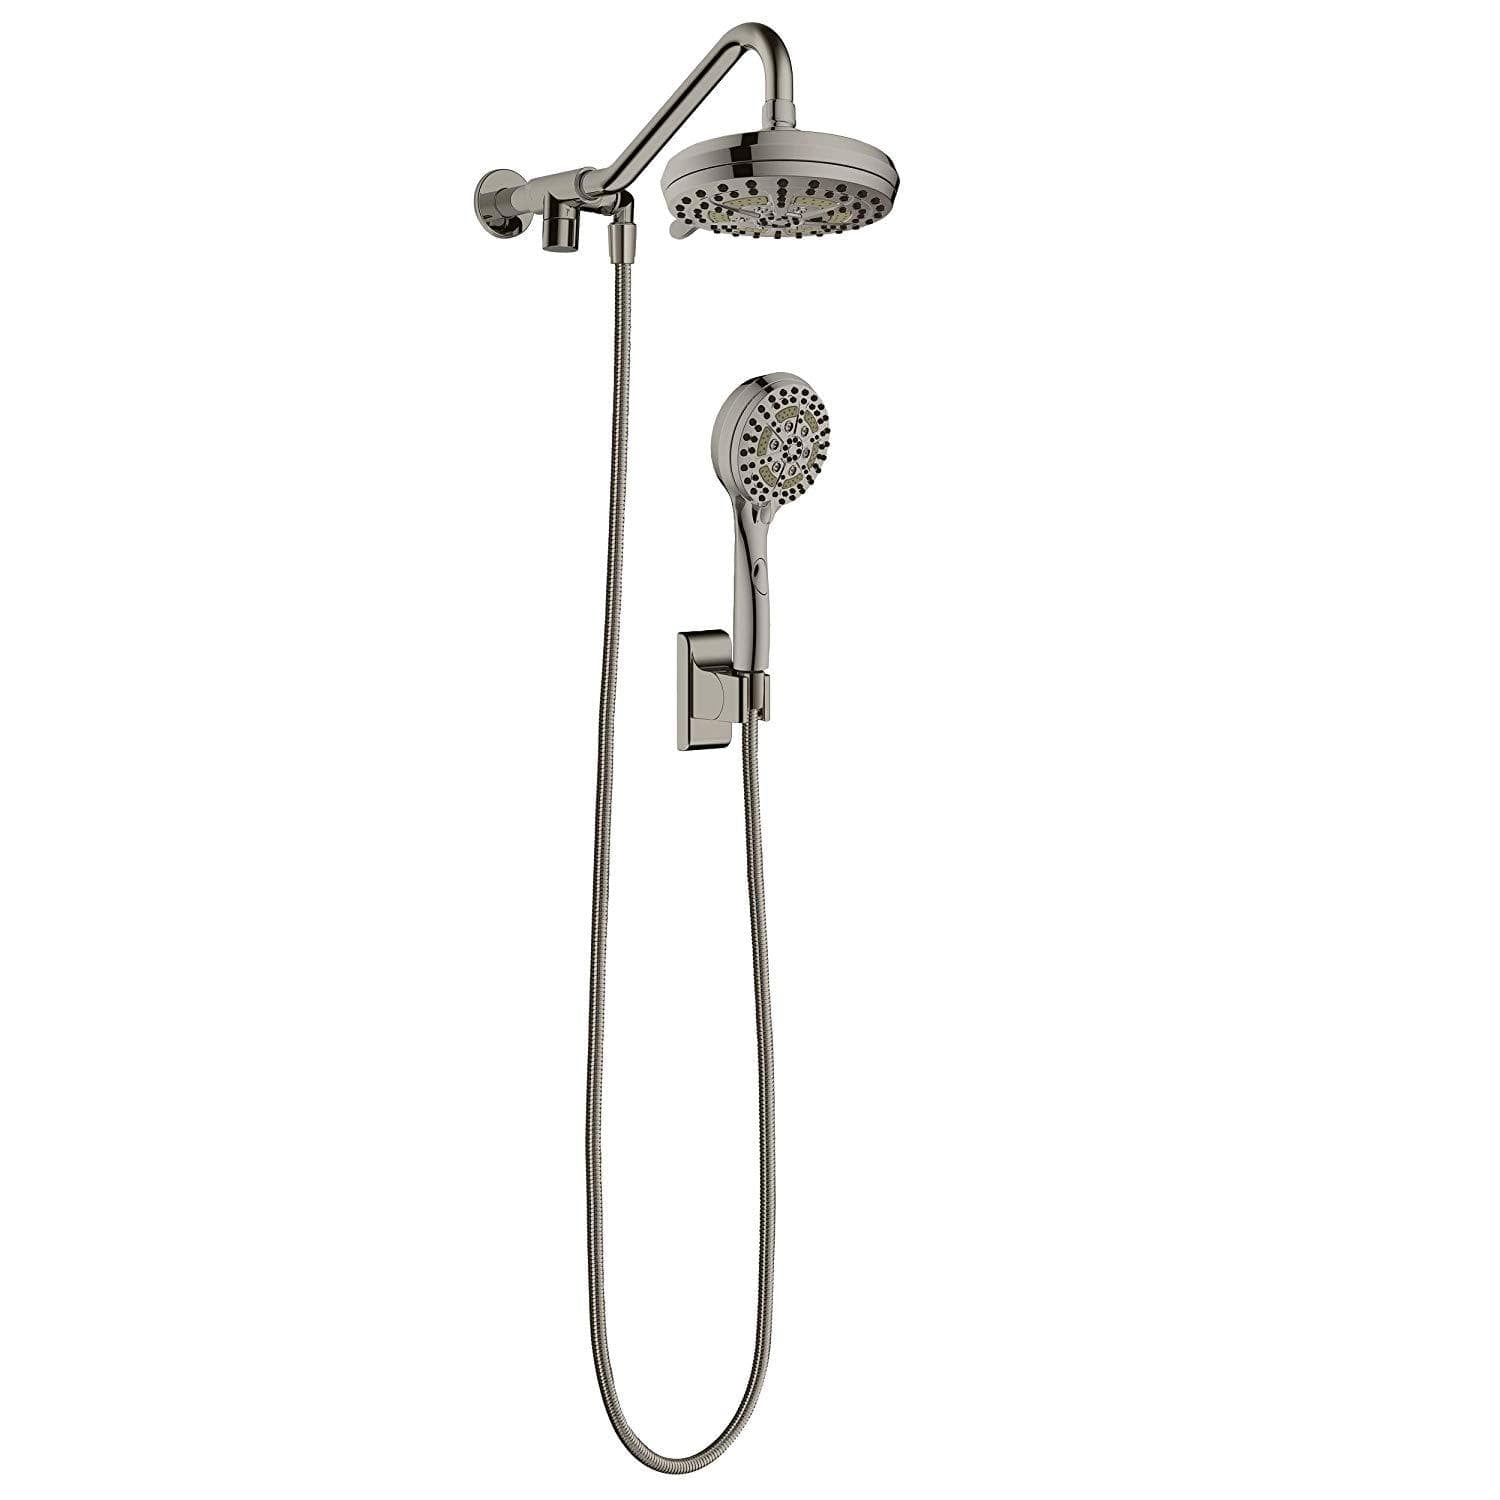 Pulse ShowerSpas Oasis Shower System with 5-Function 7" Showerhead and 6-Function Hand Shower - Senior.com Shower Systems